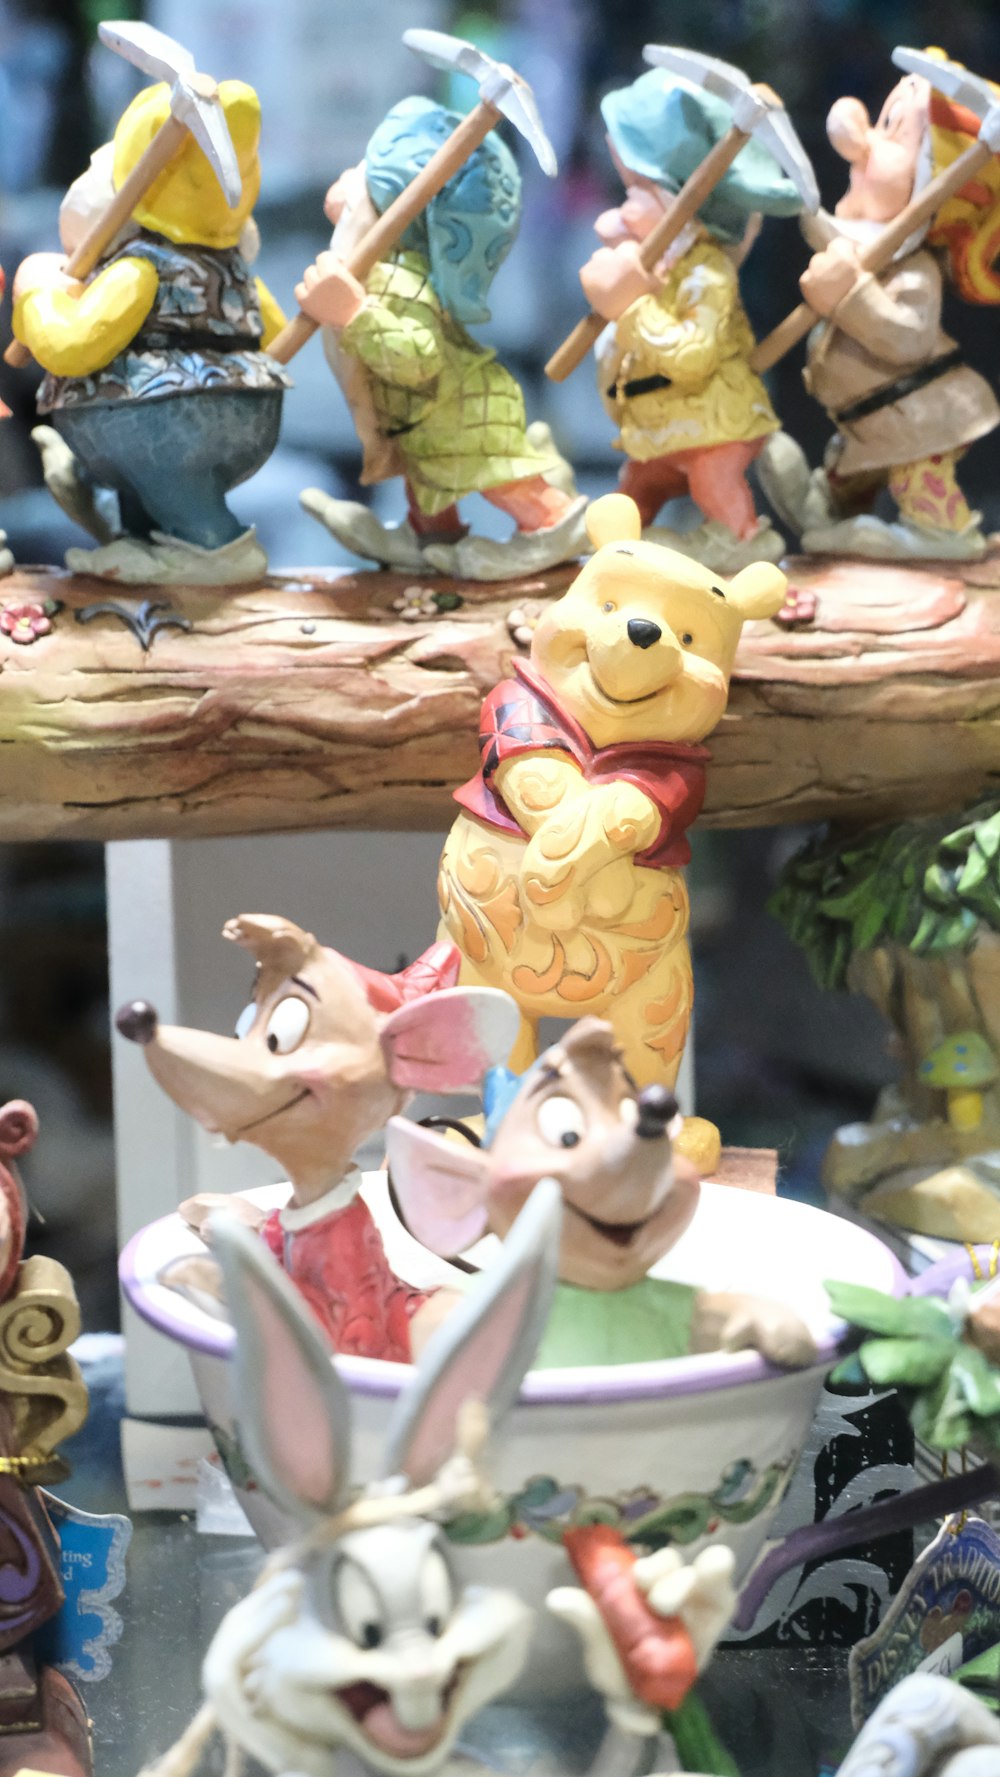 a group of figurines of winnie the pooh